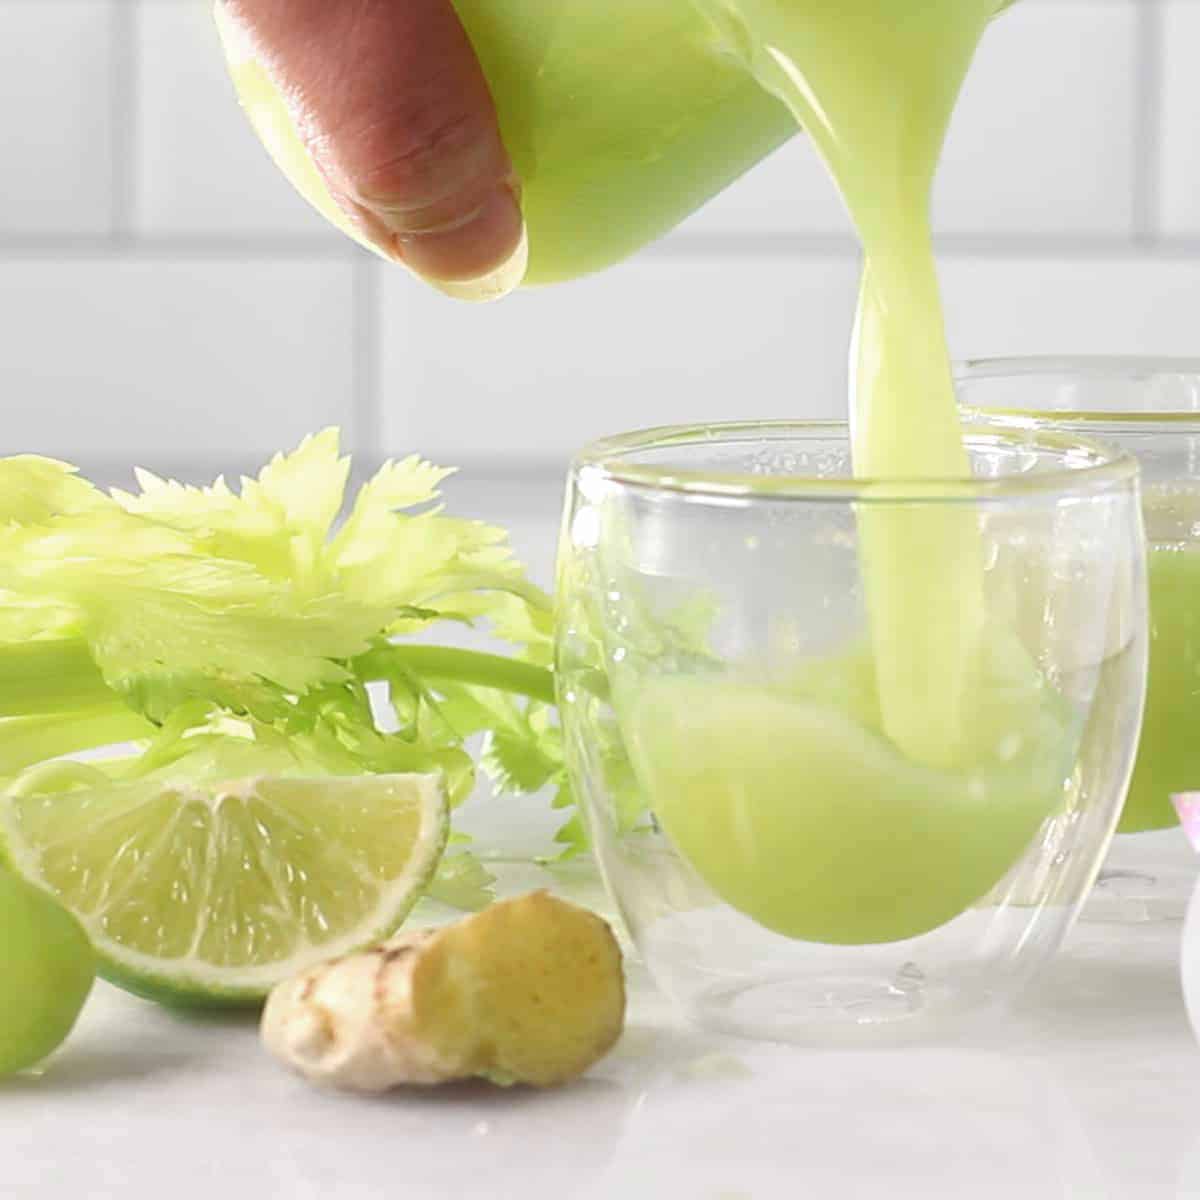 celery juice being poured into a glass.